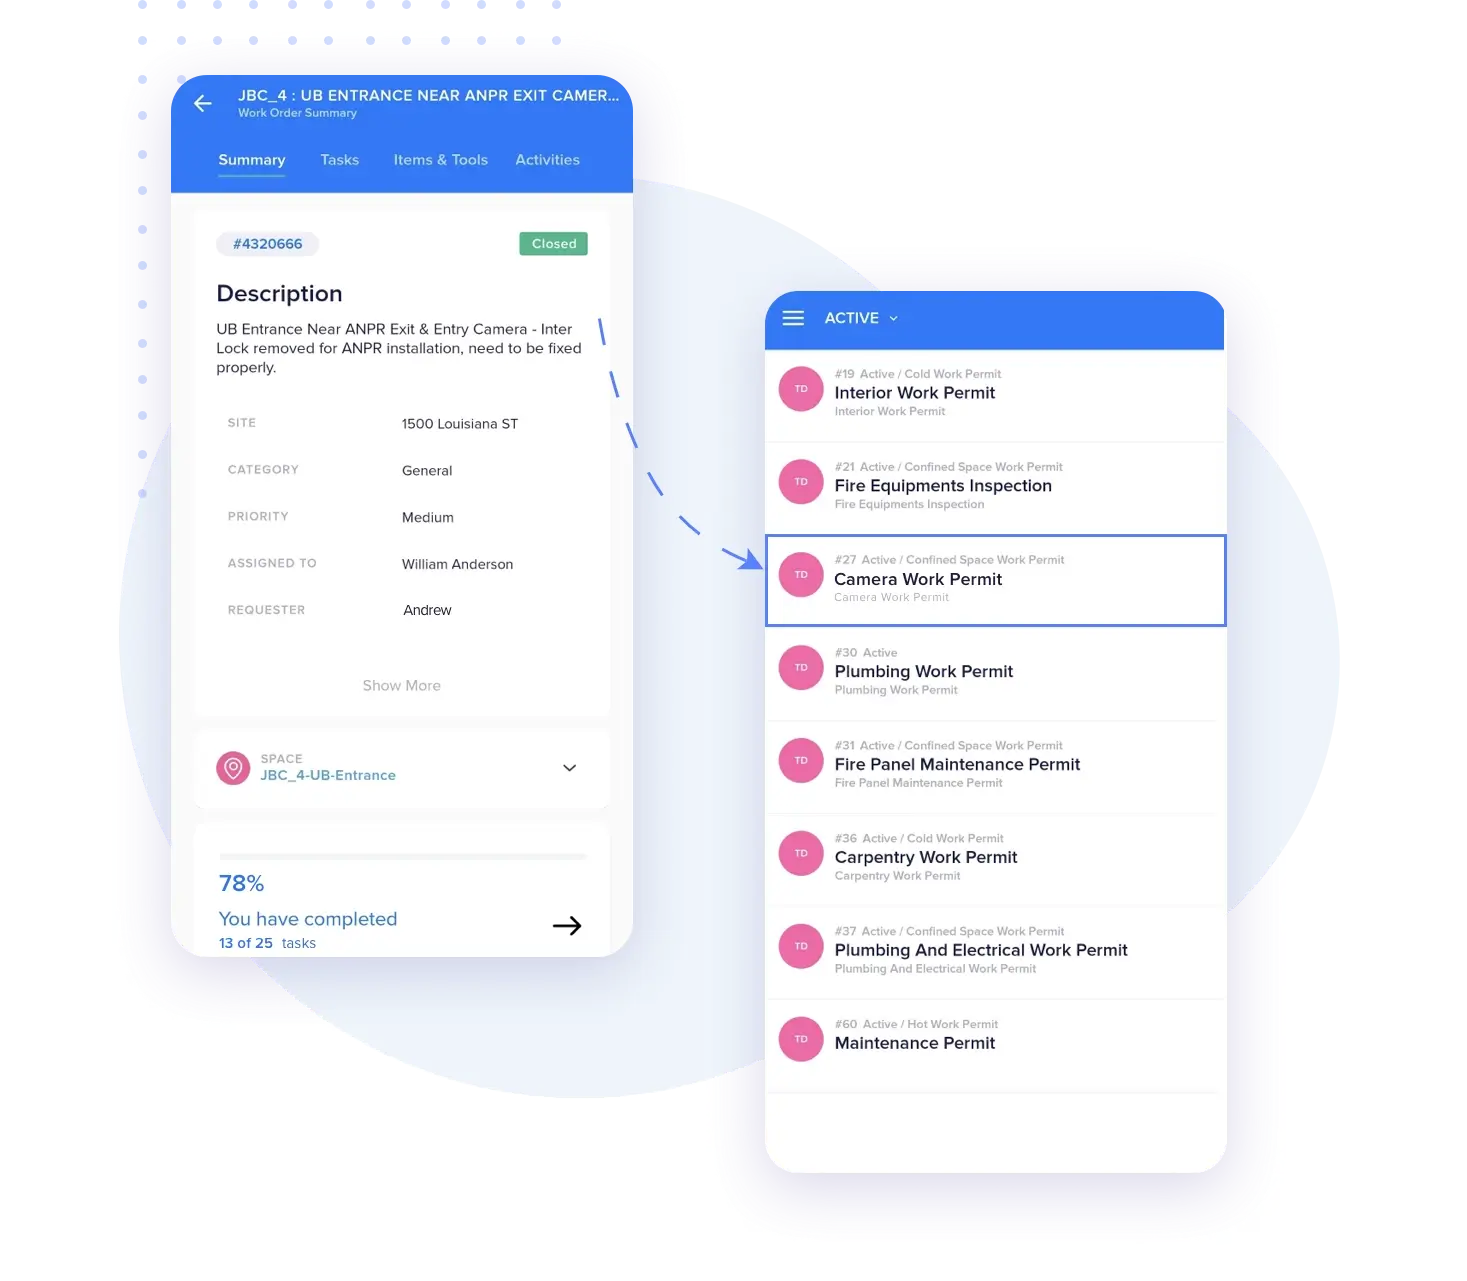 Make it easy for your vendors to access work orders with all the details they need and a tasks checklist to ensure work orders are executed to perfection 